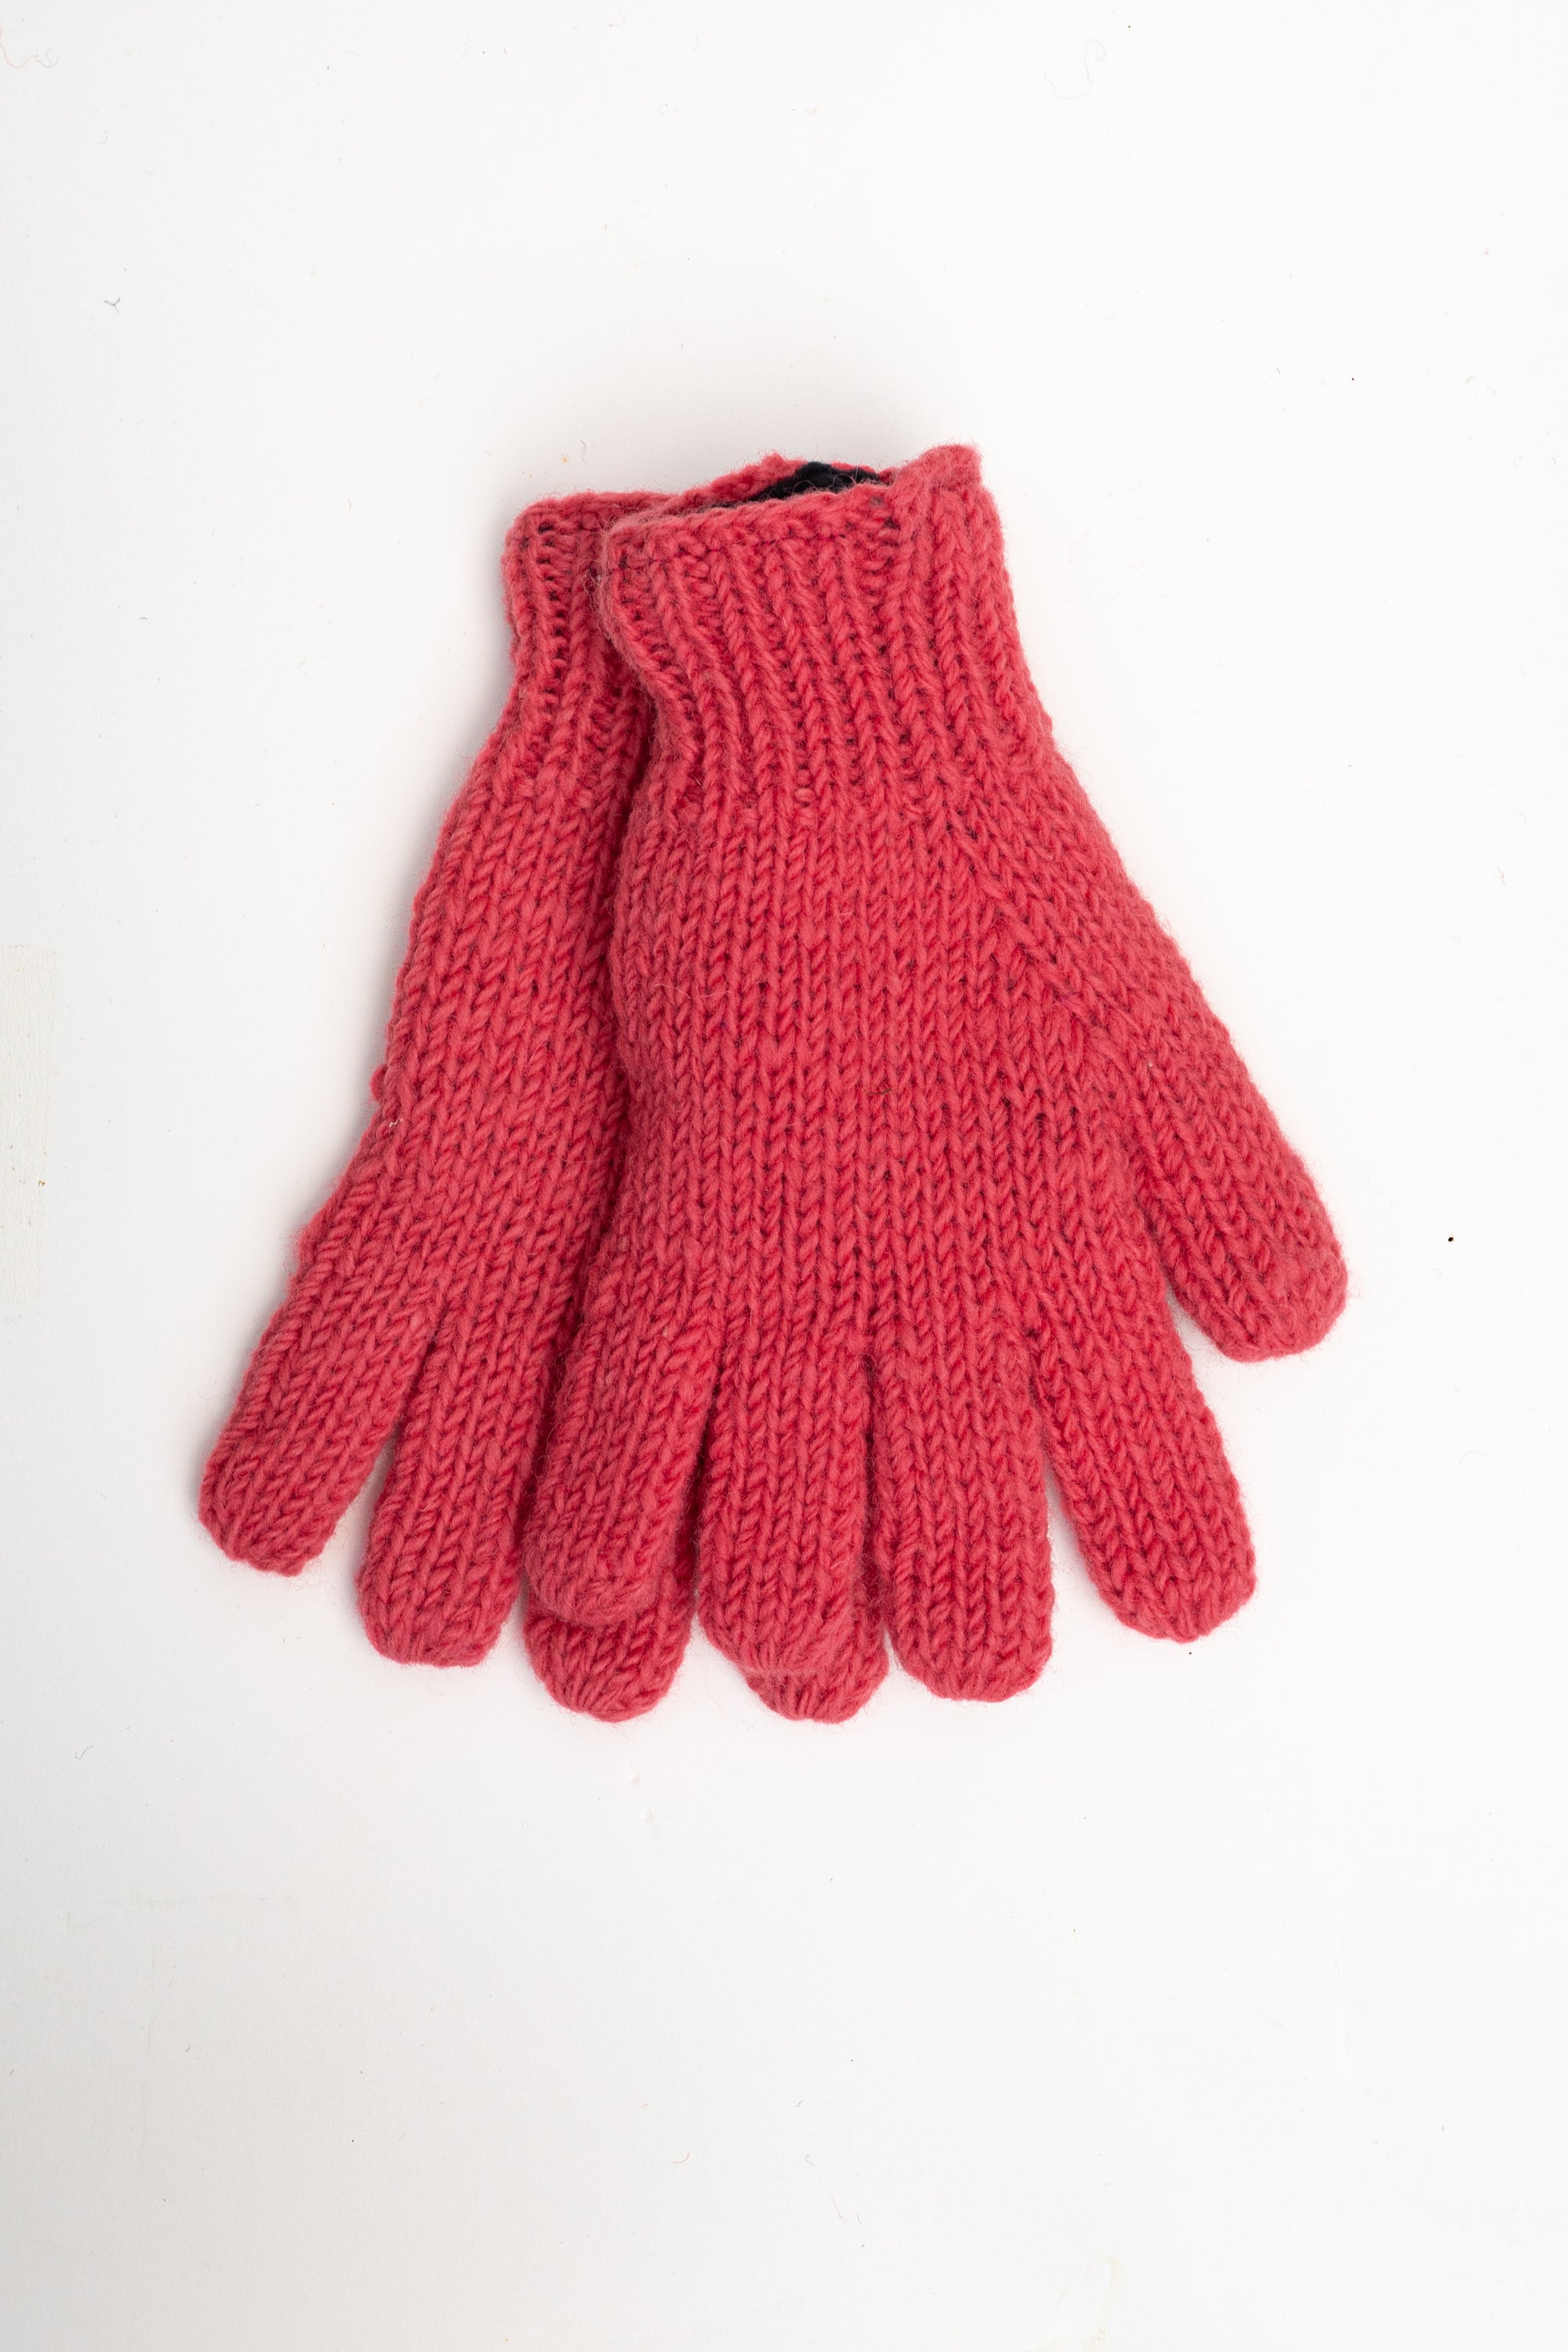 Solid Wool Gloves (Pink) - Made in Nepal